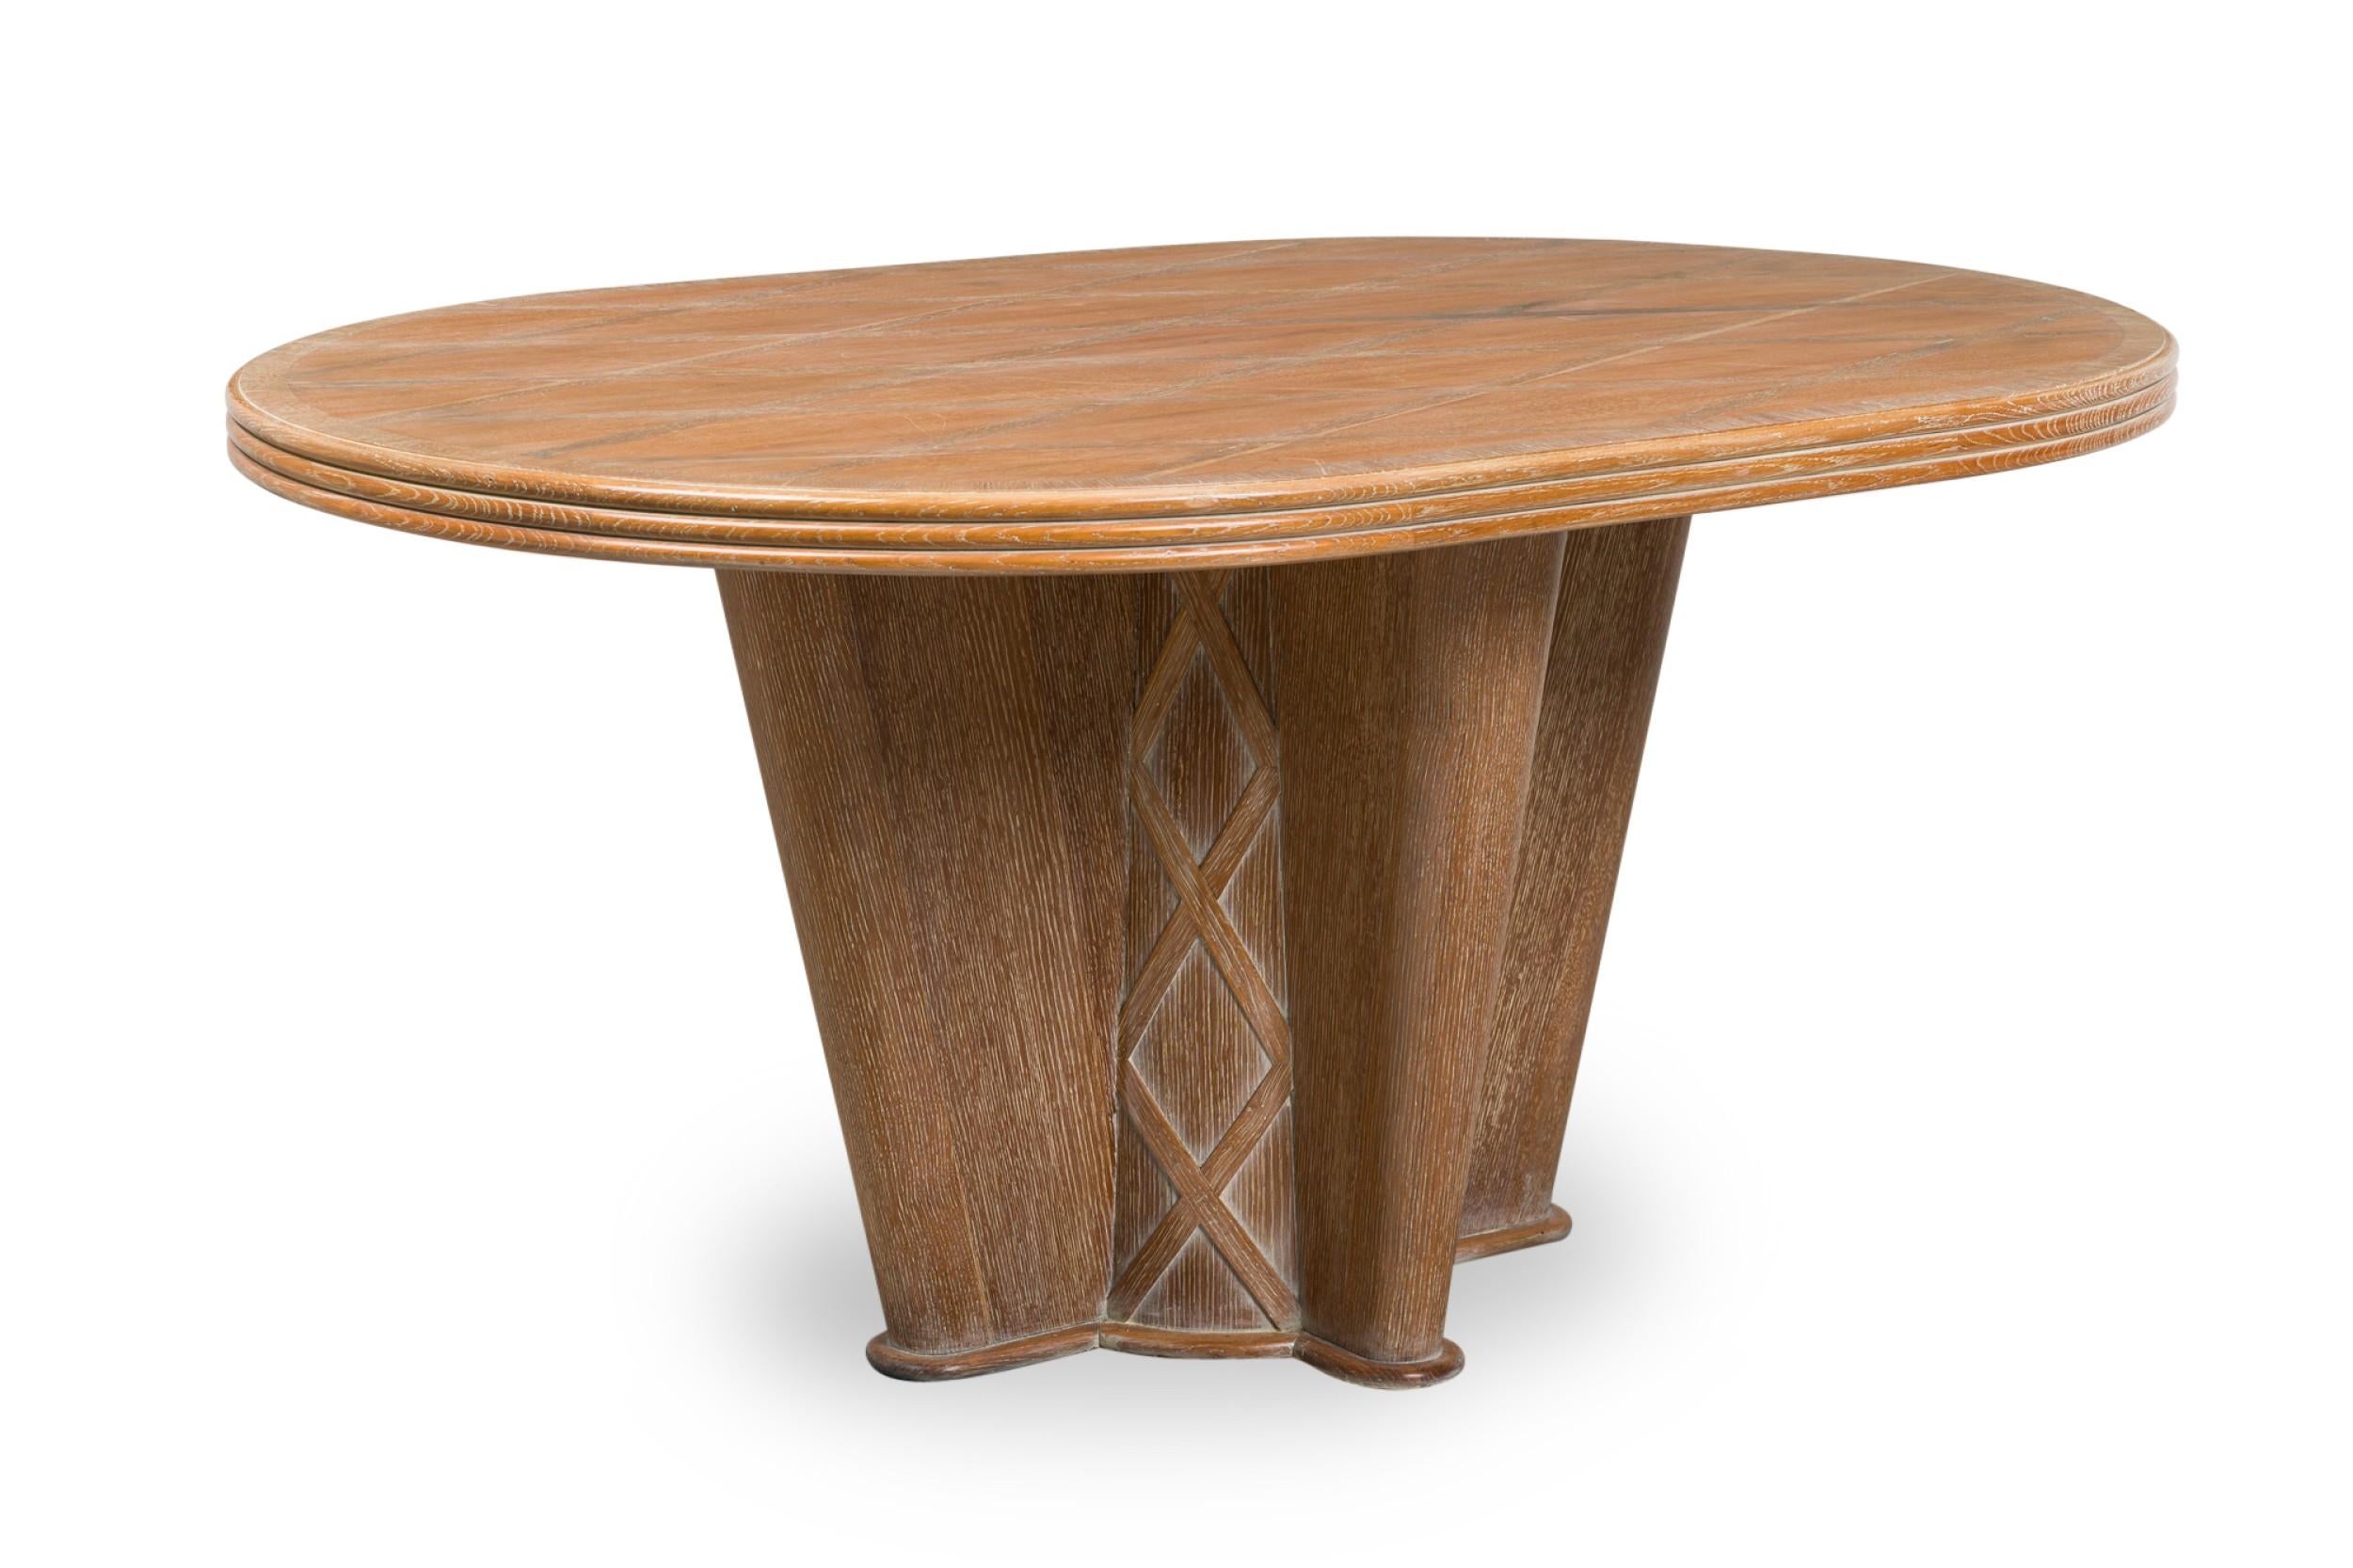 20th Century Soubrier Mid-Century French Limed Oak Inlaid Dining Table For Sale